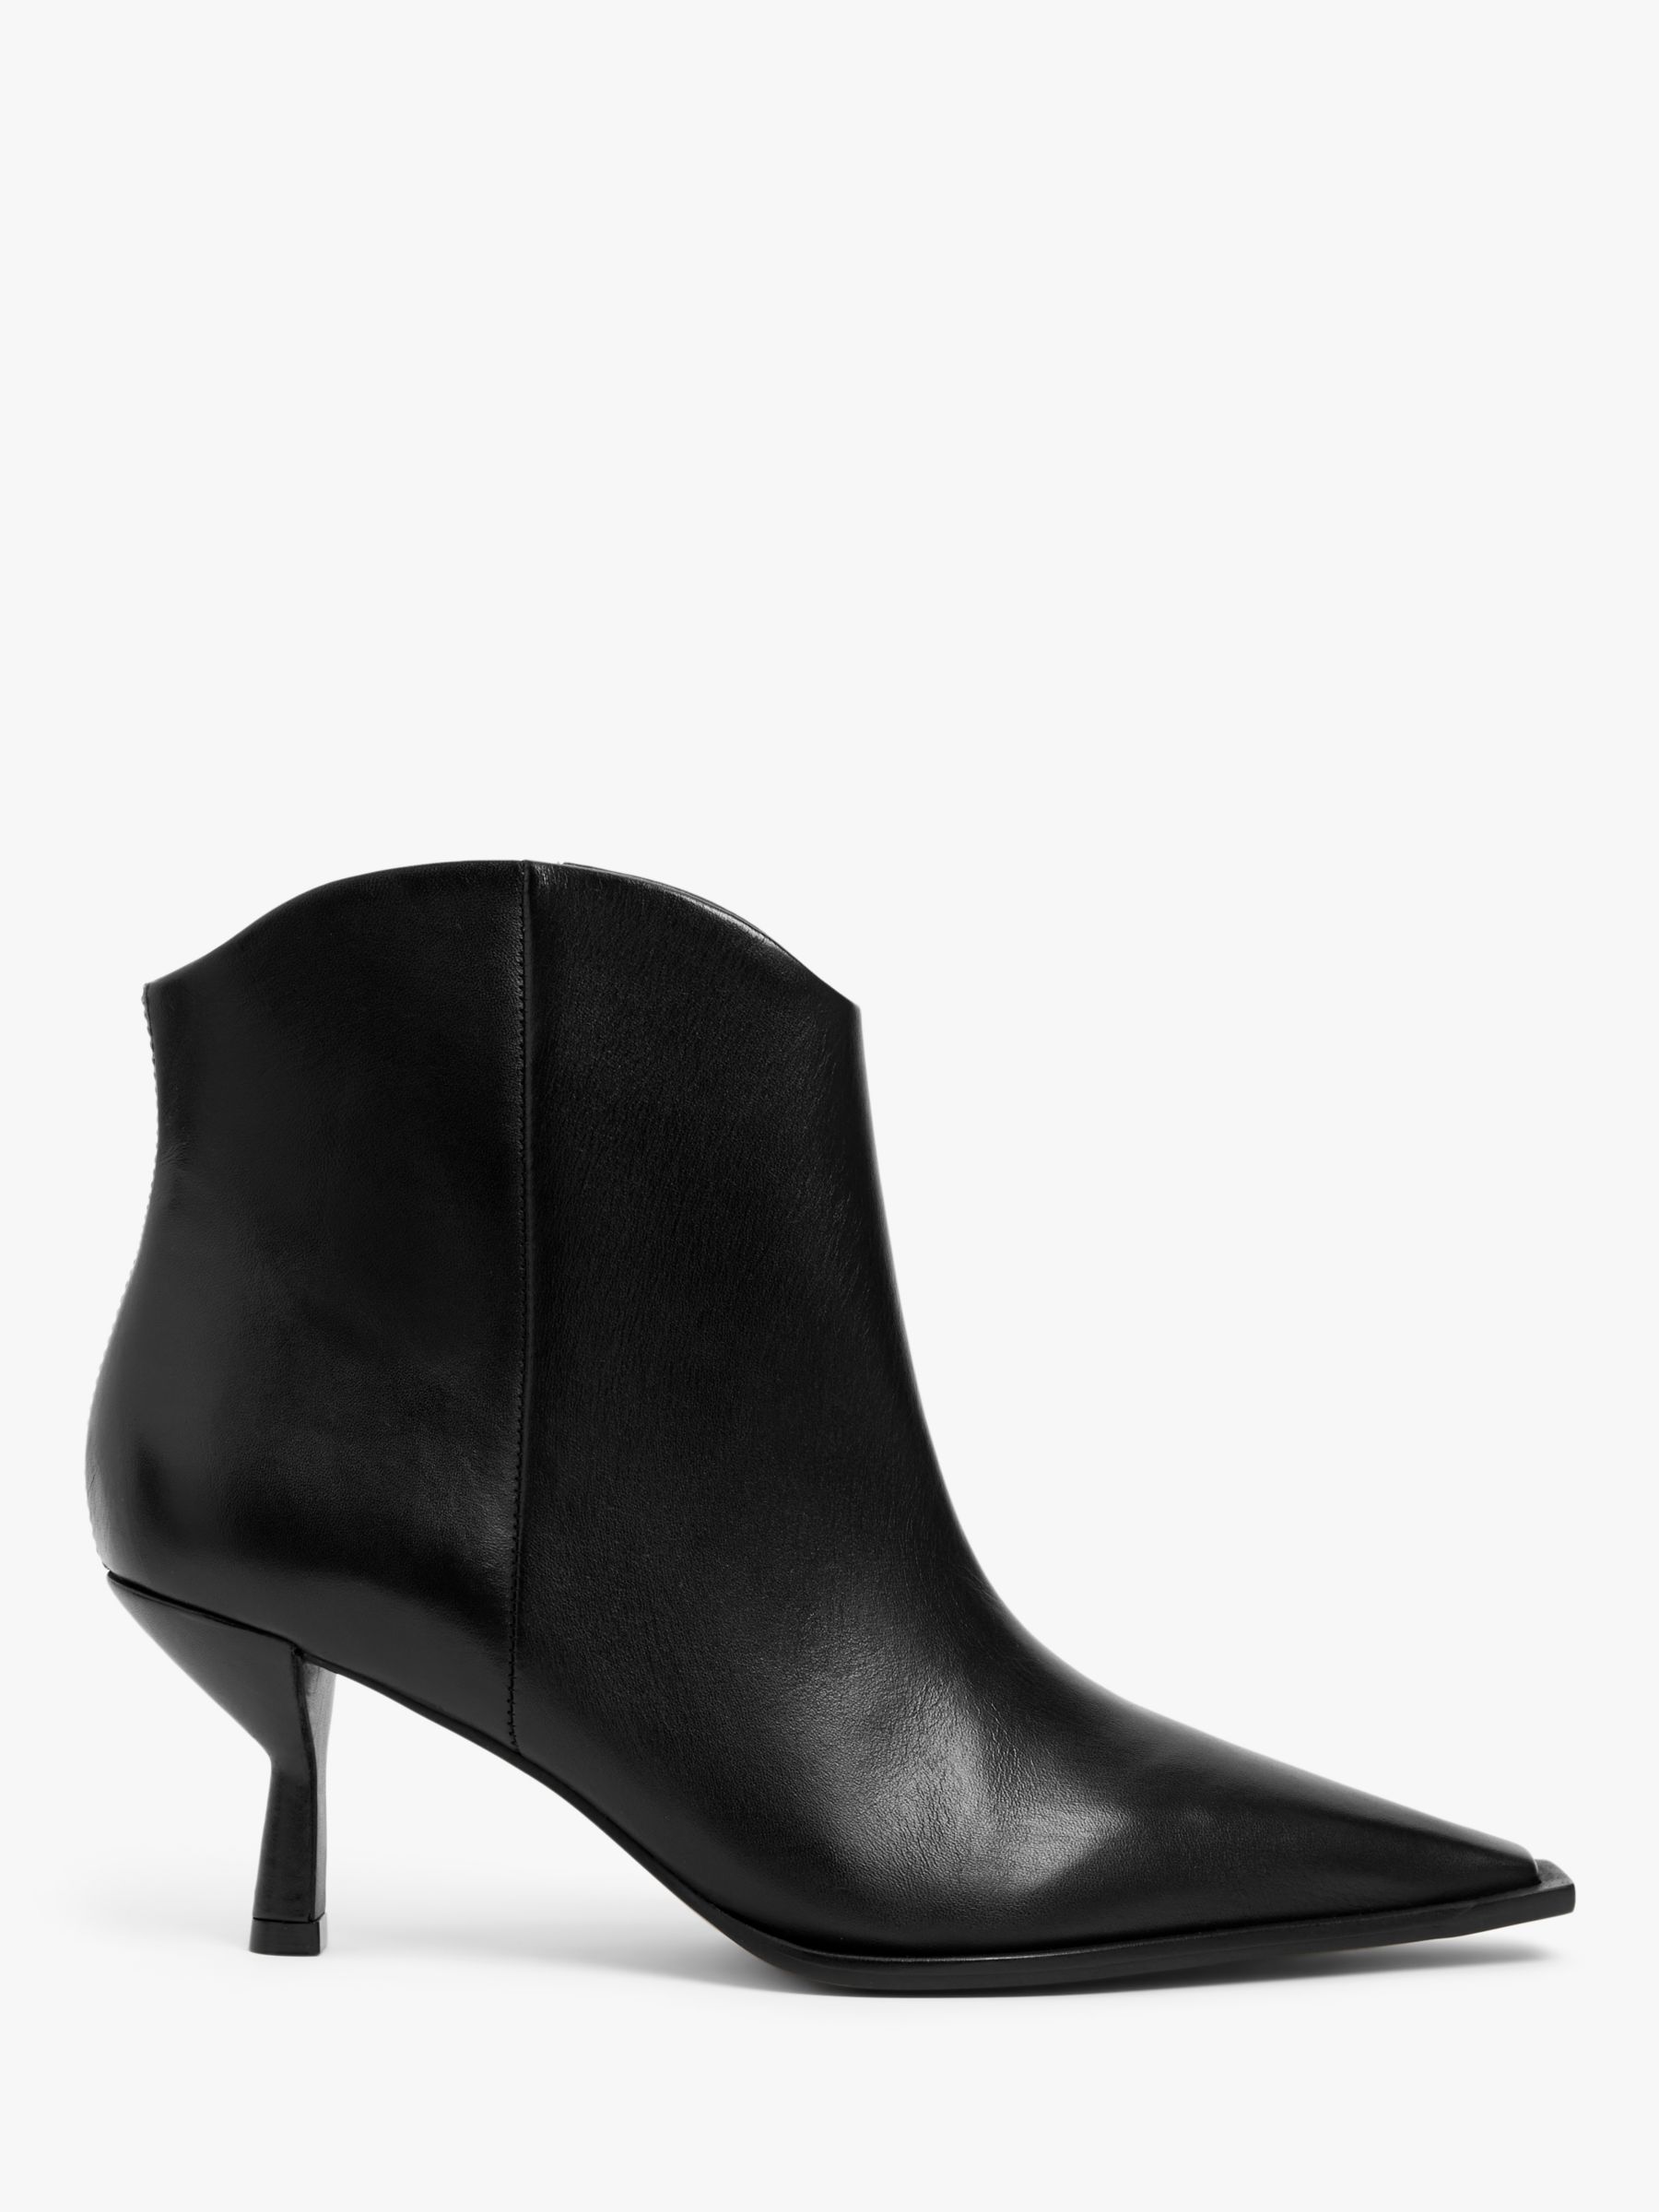 John Lewis Panama Leather Dressy Western Ankle Boots, Black at